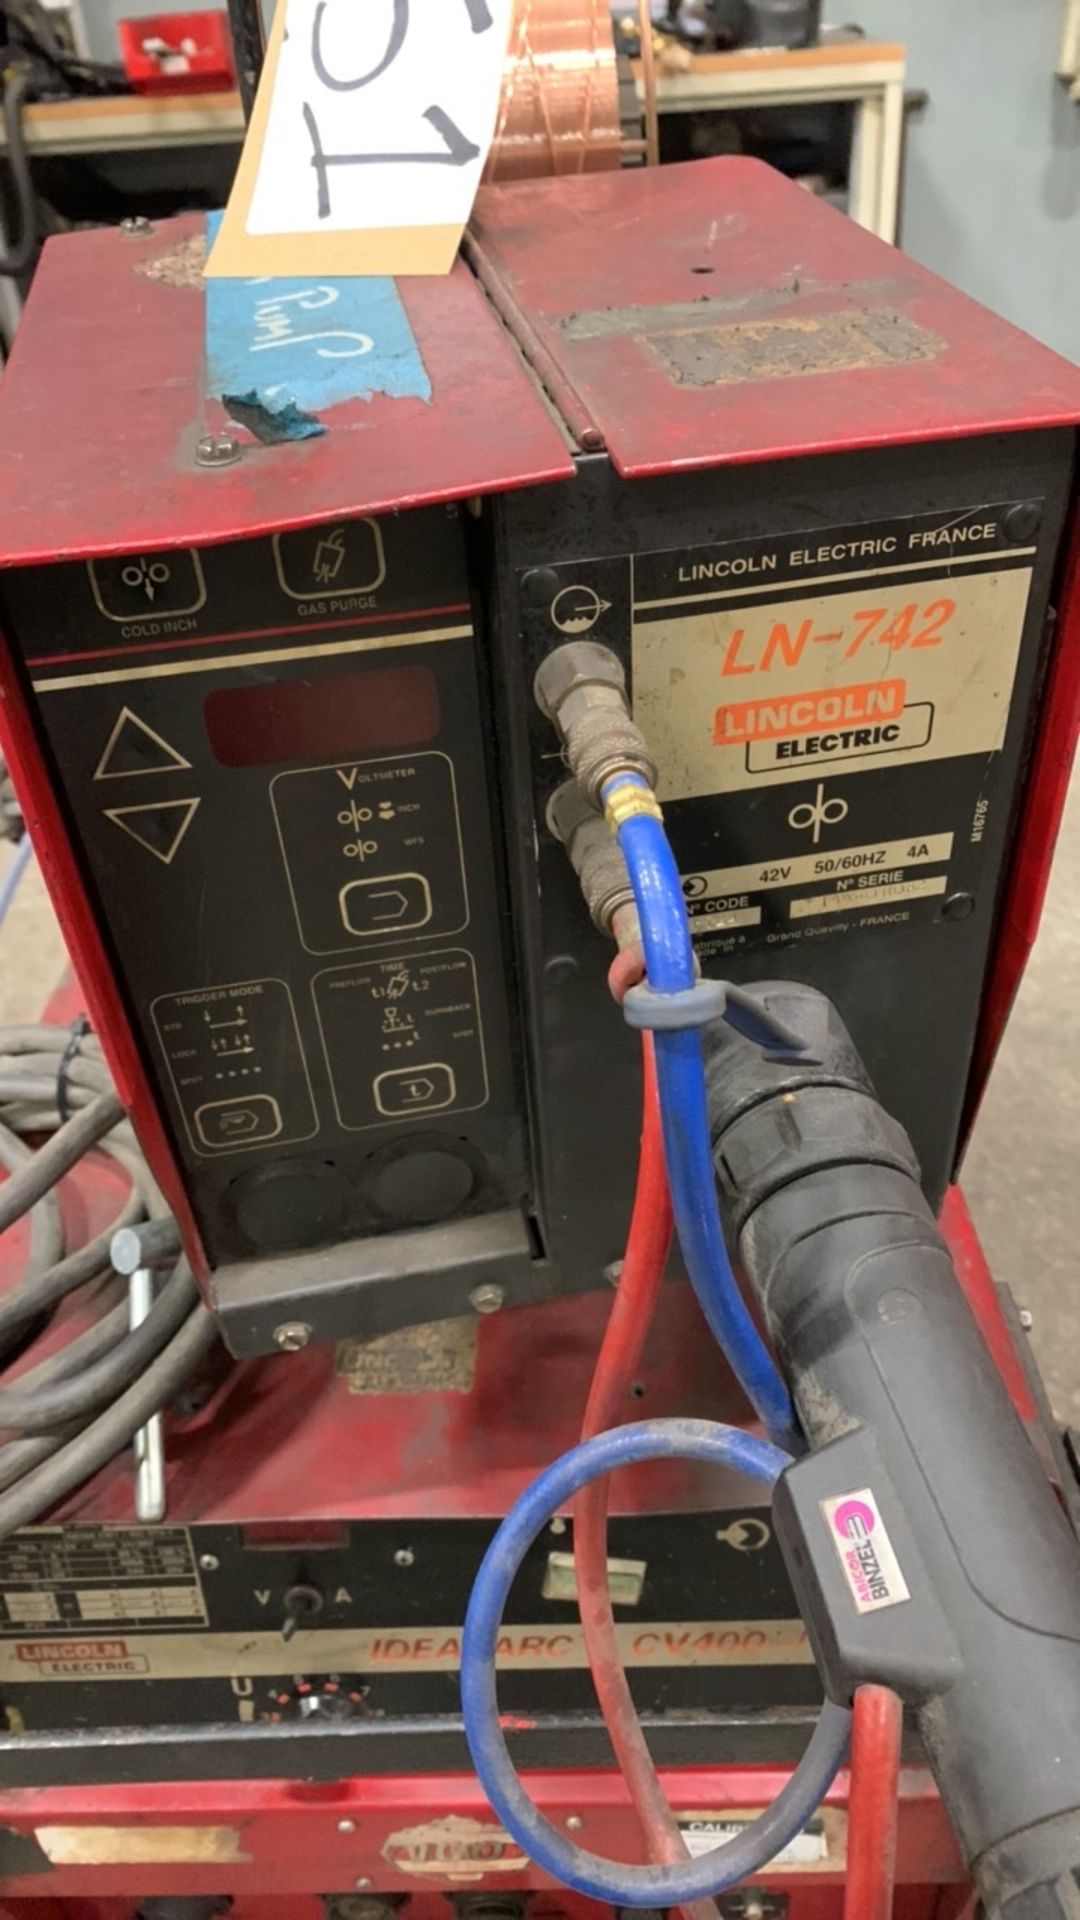 Lincoln Electric Idealarc CV400 Mig Welder Serial No AC-F1950230266 WITH ln -742 Wire Feed Unit - Image 3 of 4